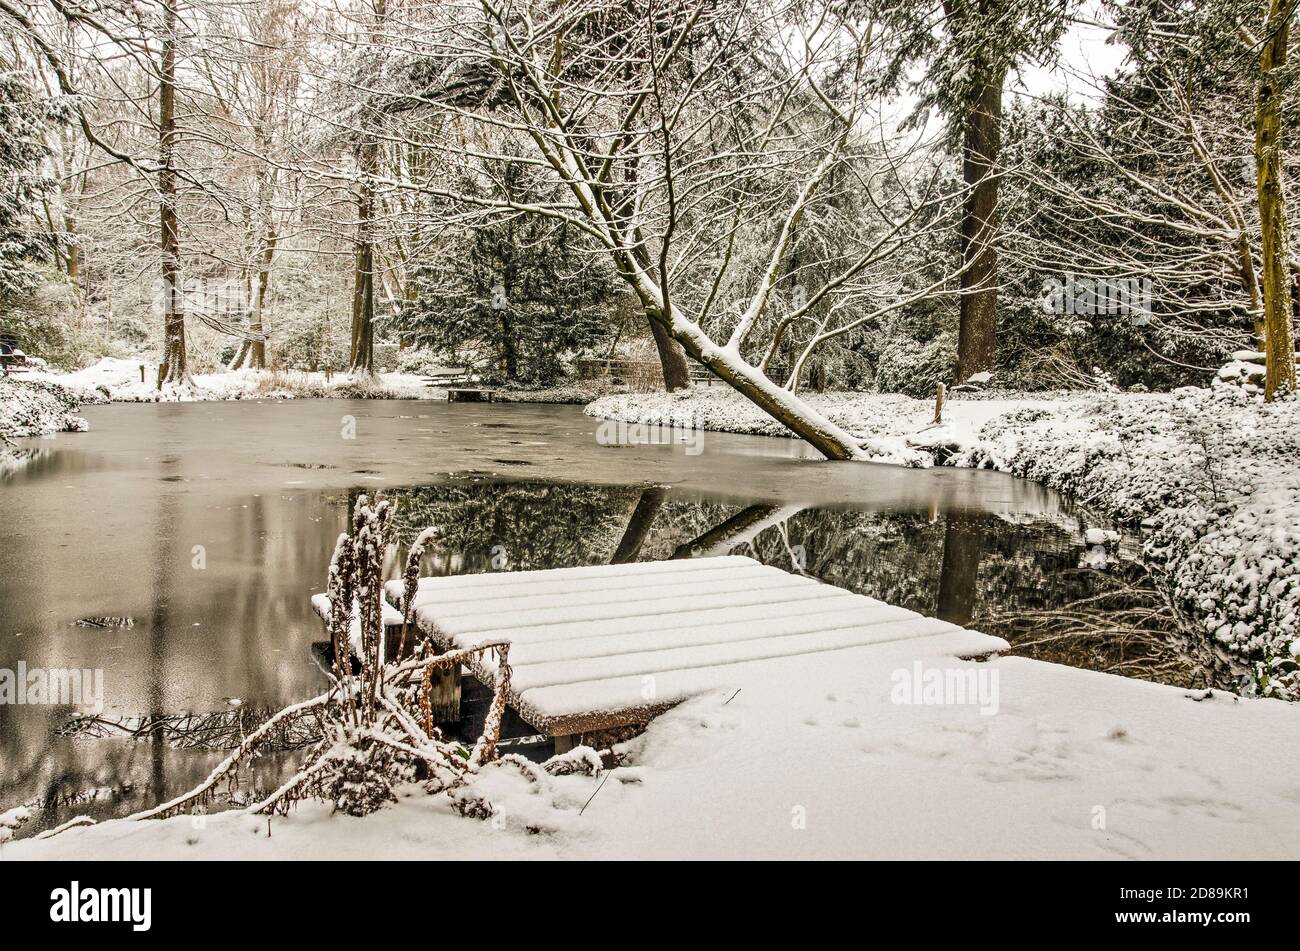 Rotterdam, The Netherlands, January 22, 2020: tranquil winter scene around a pond in Schoonoord Park Stock Photo